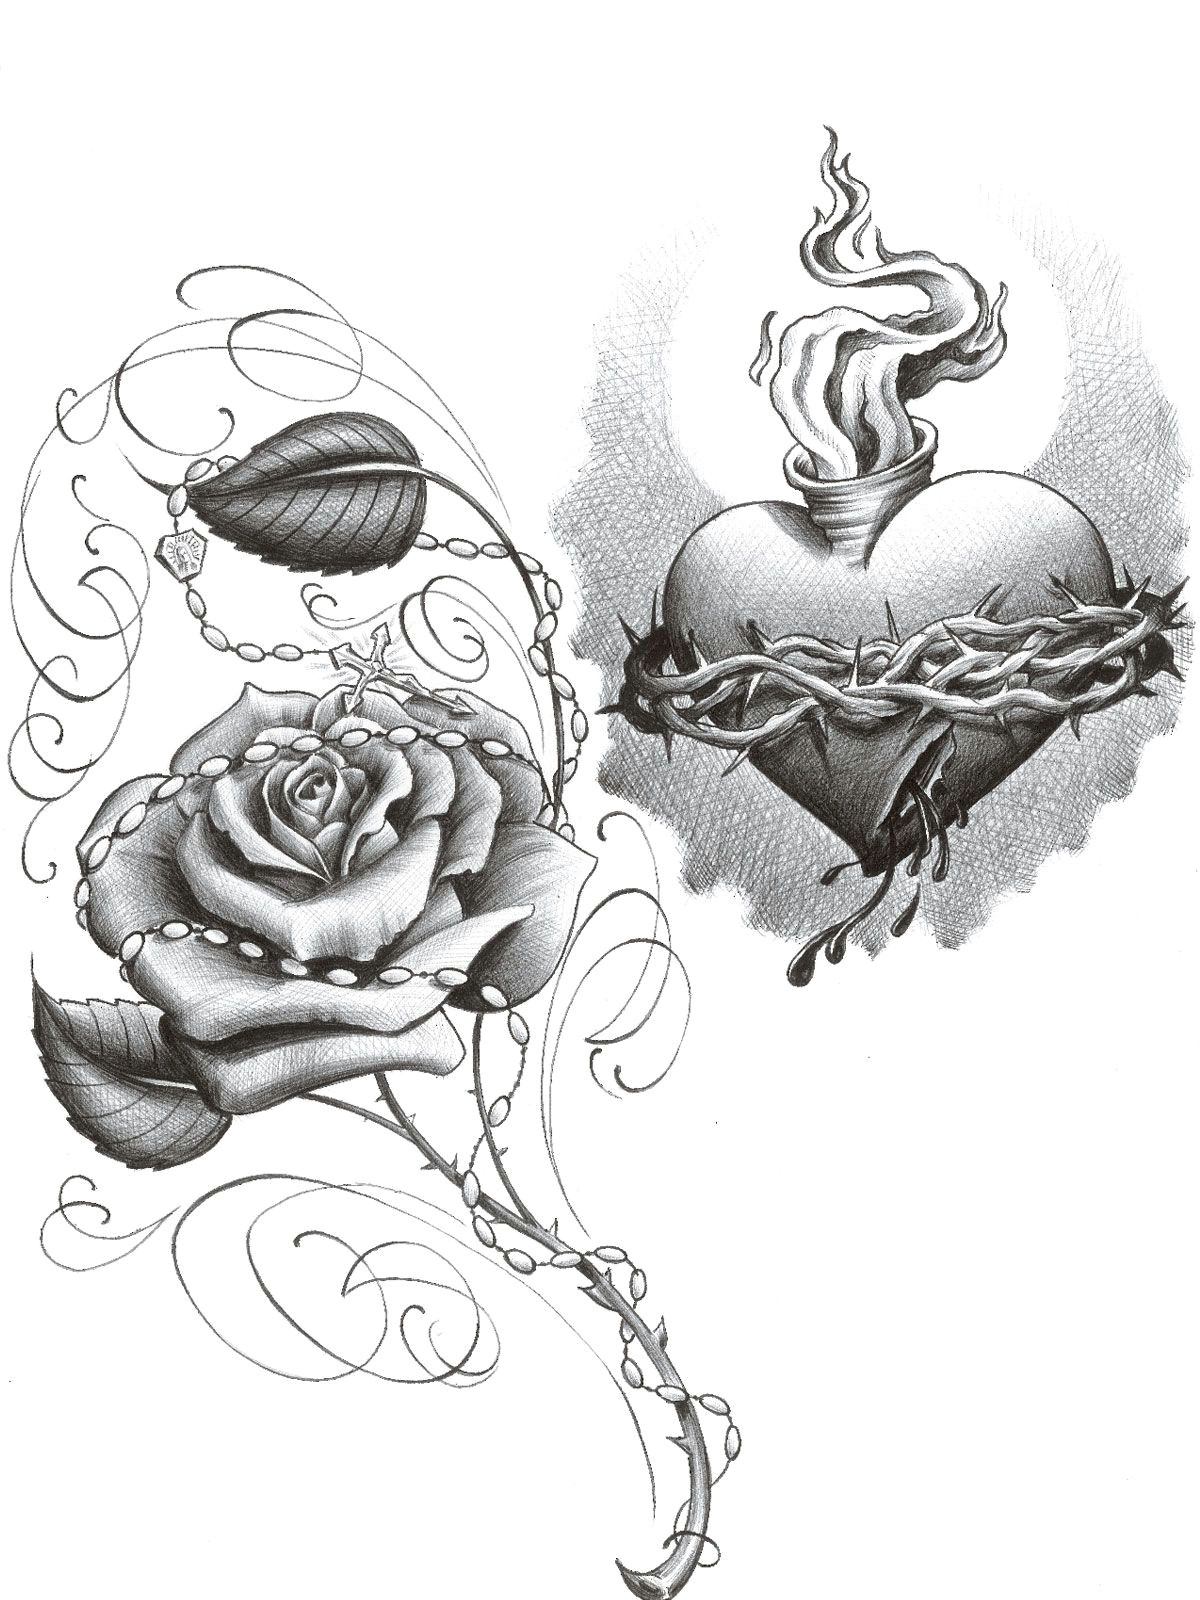 chicano art drawings roses chicano rose thugs chica tat by 2face tattoo on deviantart see it